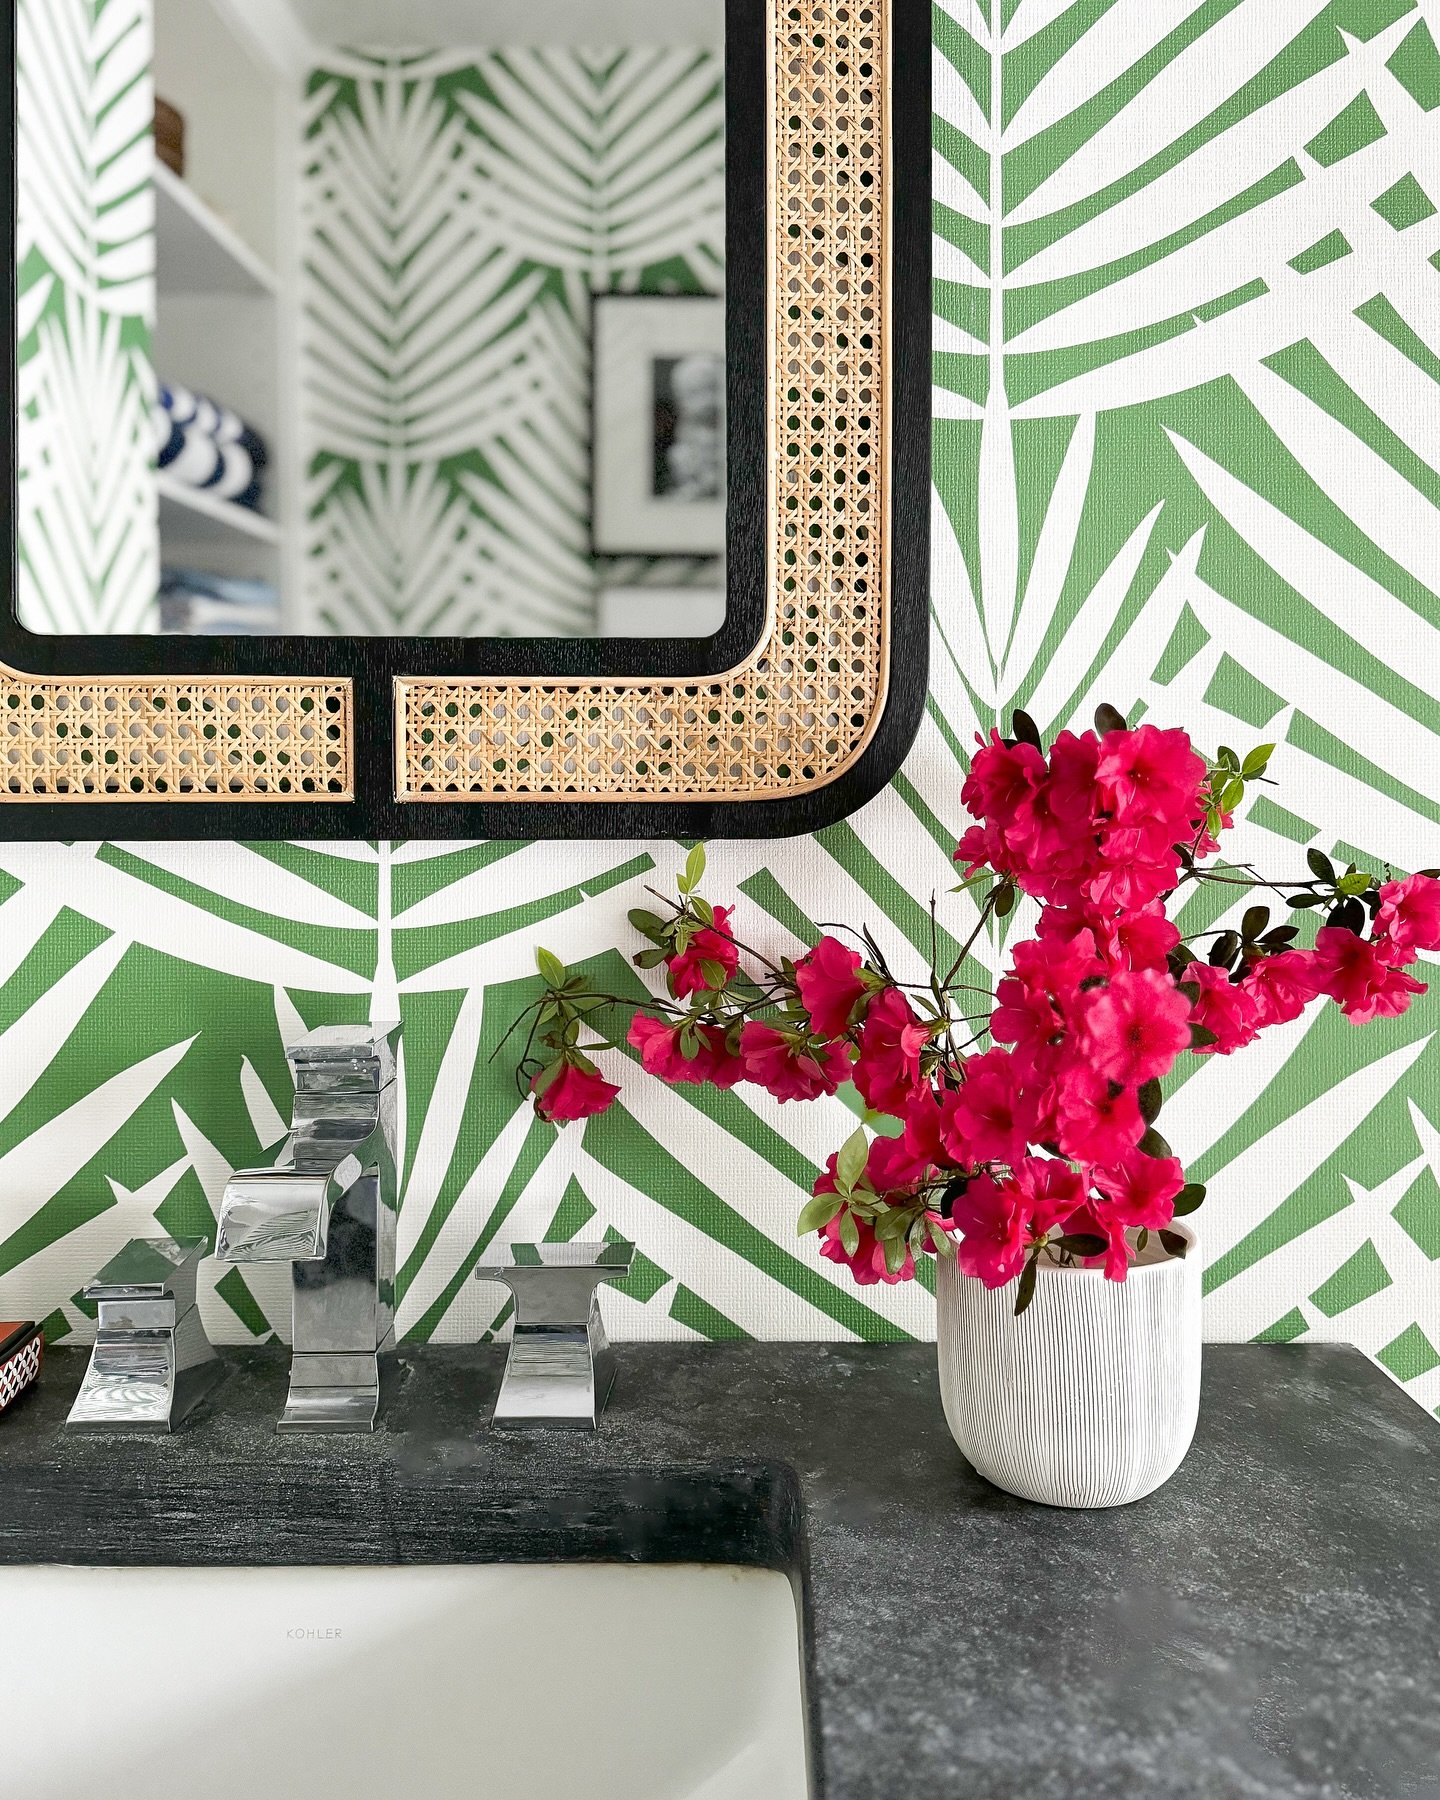 I have another little surprise for my son when he gets home from college. His bathroom has gotten a makeover! Hopefully he won&rsquo;t see this post but if you do see it Dewey - I hope you like it! 😀🍃
Design @kristinaphillipsinteriordesign 
.
.
.
.